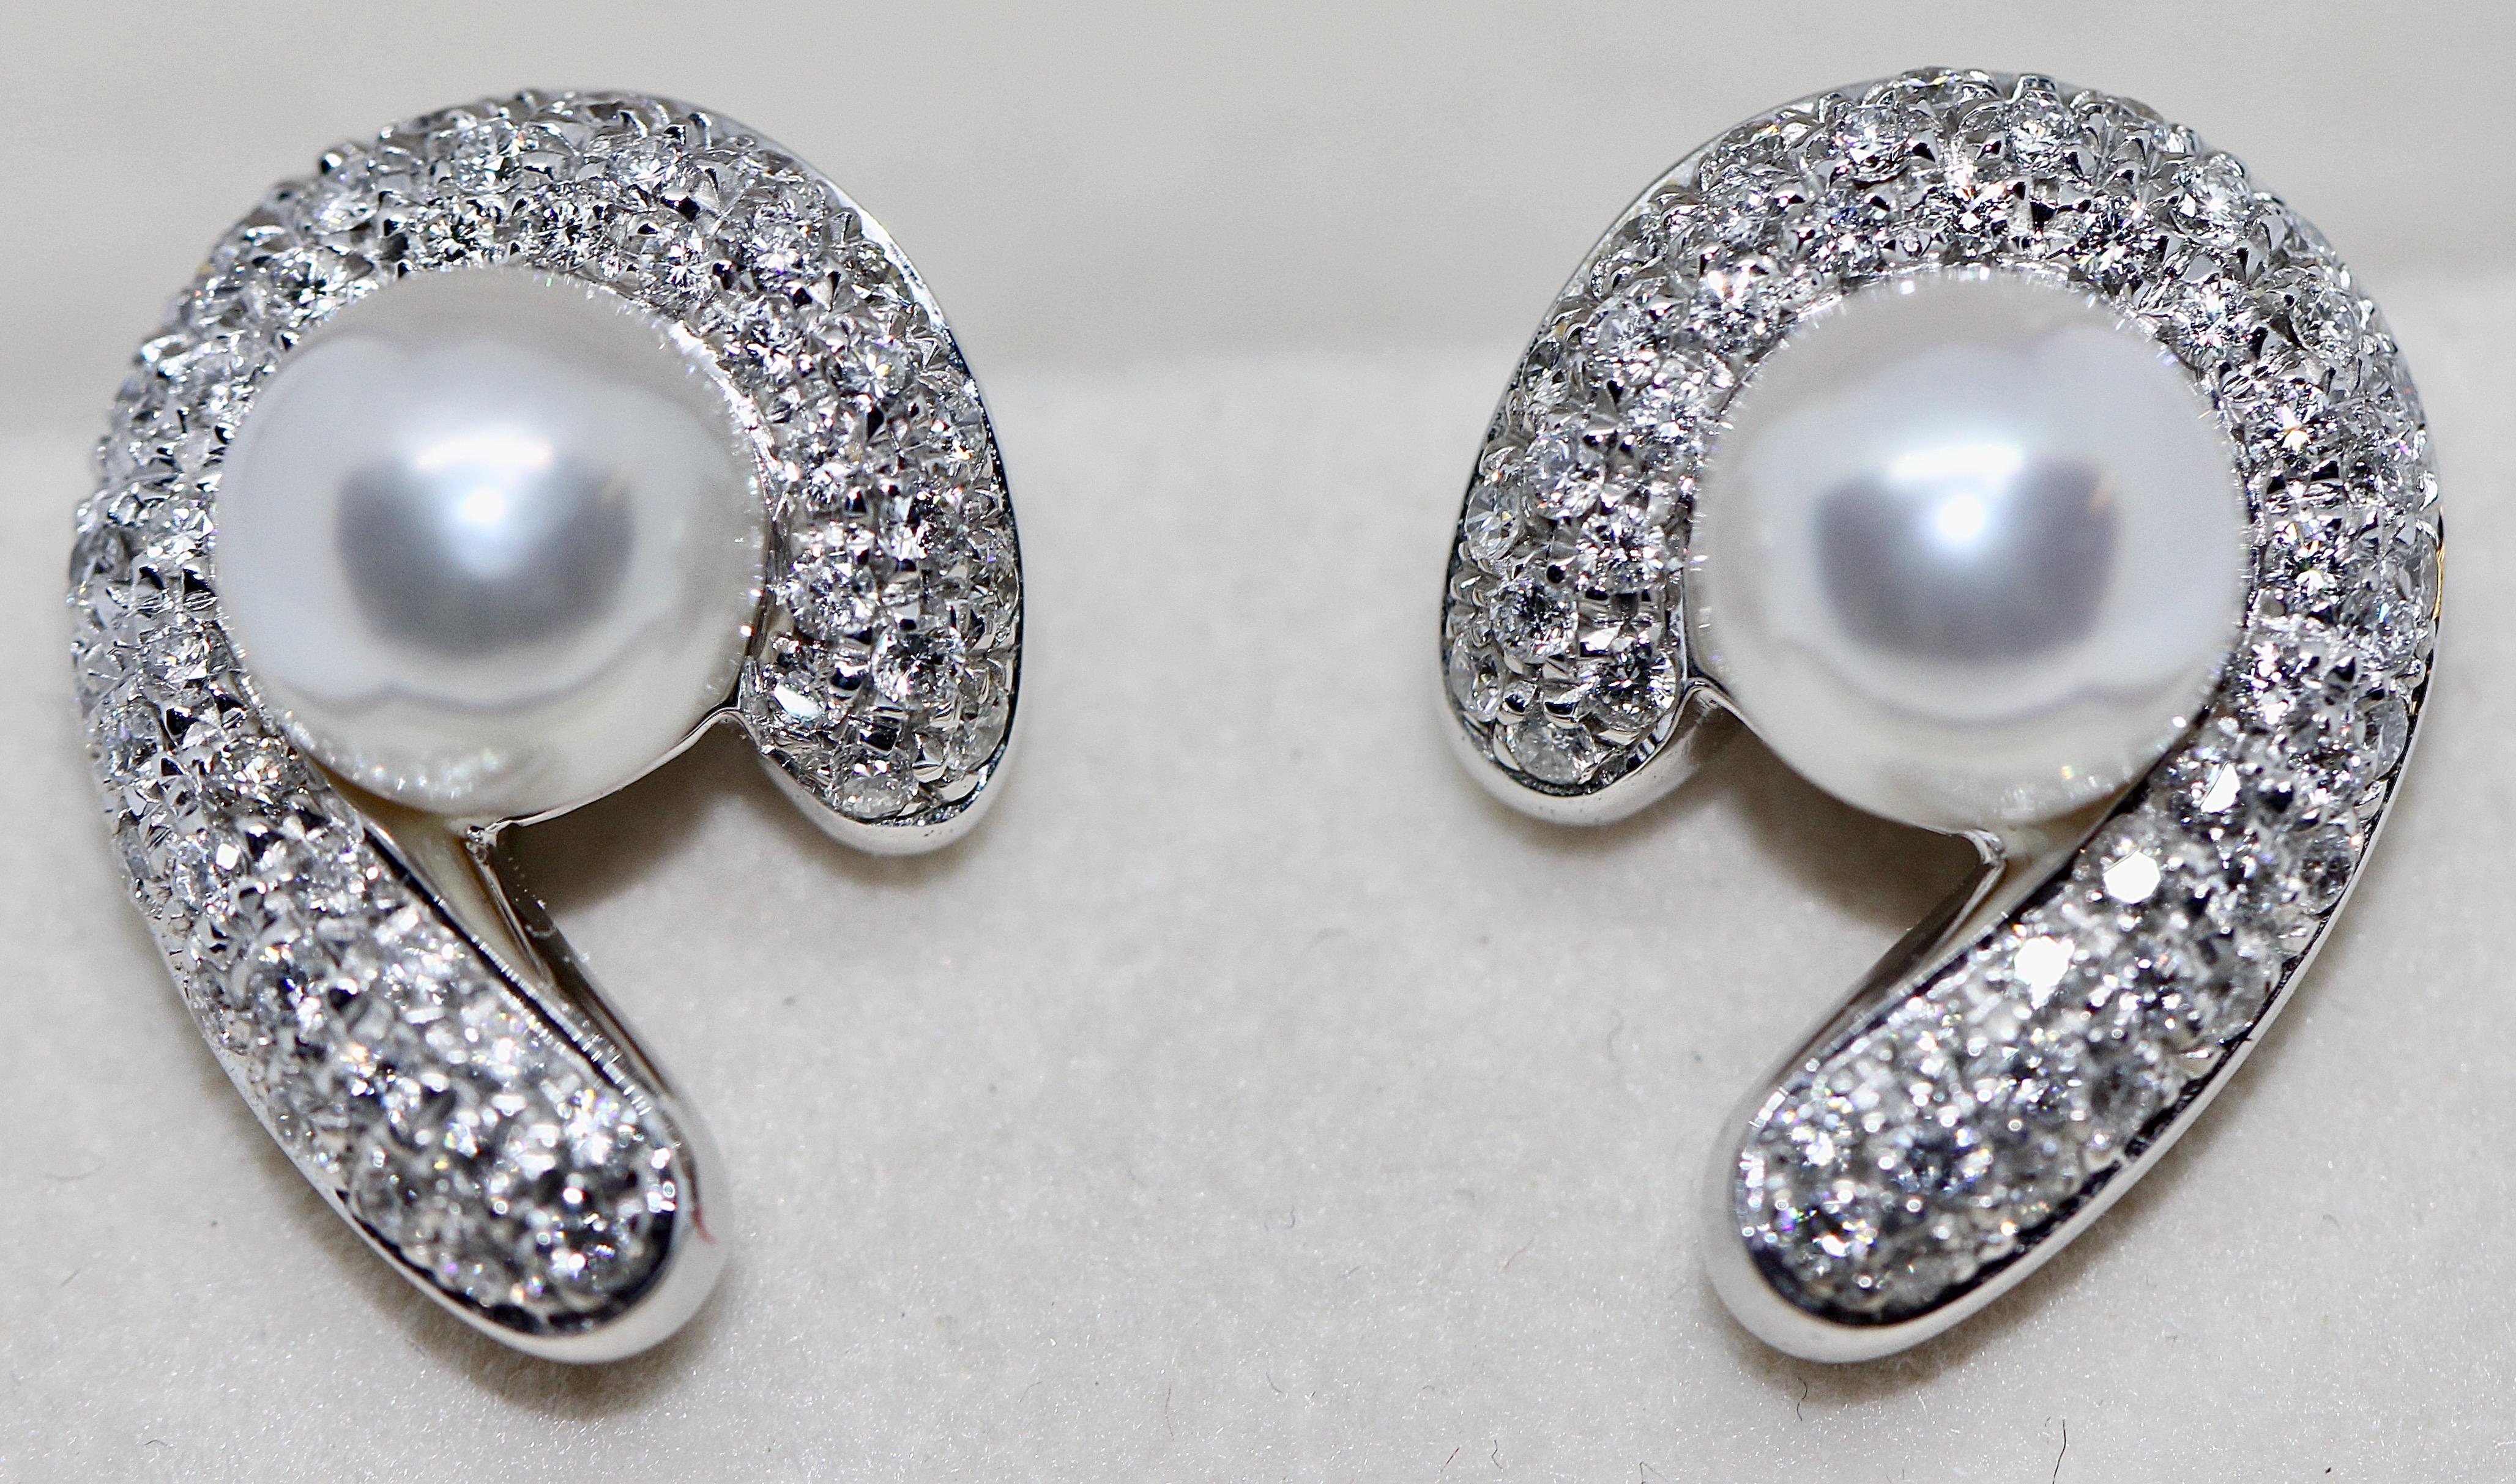 Original 18 Karat White Gold Pearl Ear Clips with Diamonds, by BUCHERER

Diamonds, very good quality, total weight 1.18ct.
(Wesselton, VSI 1)

Akoya pearls diameter 8mm (0.31 inch) each.

Includes certificate of authenticity.

!We also offer the